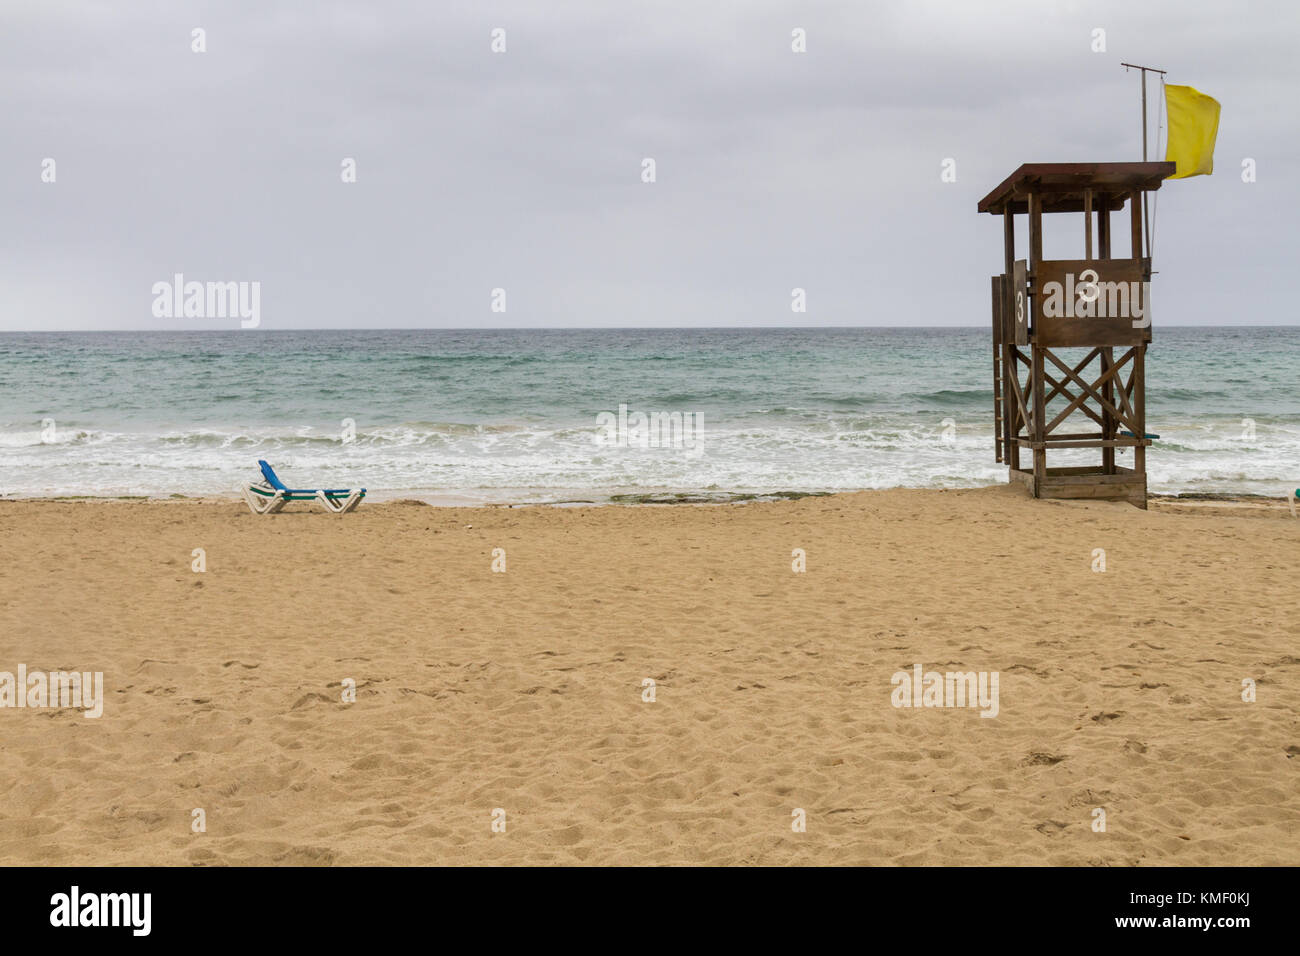 lifeguard tower on deserted beach on a rainy day Stock Photo